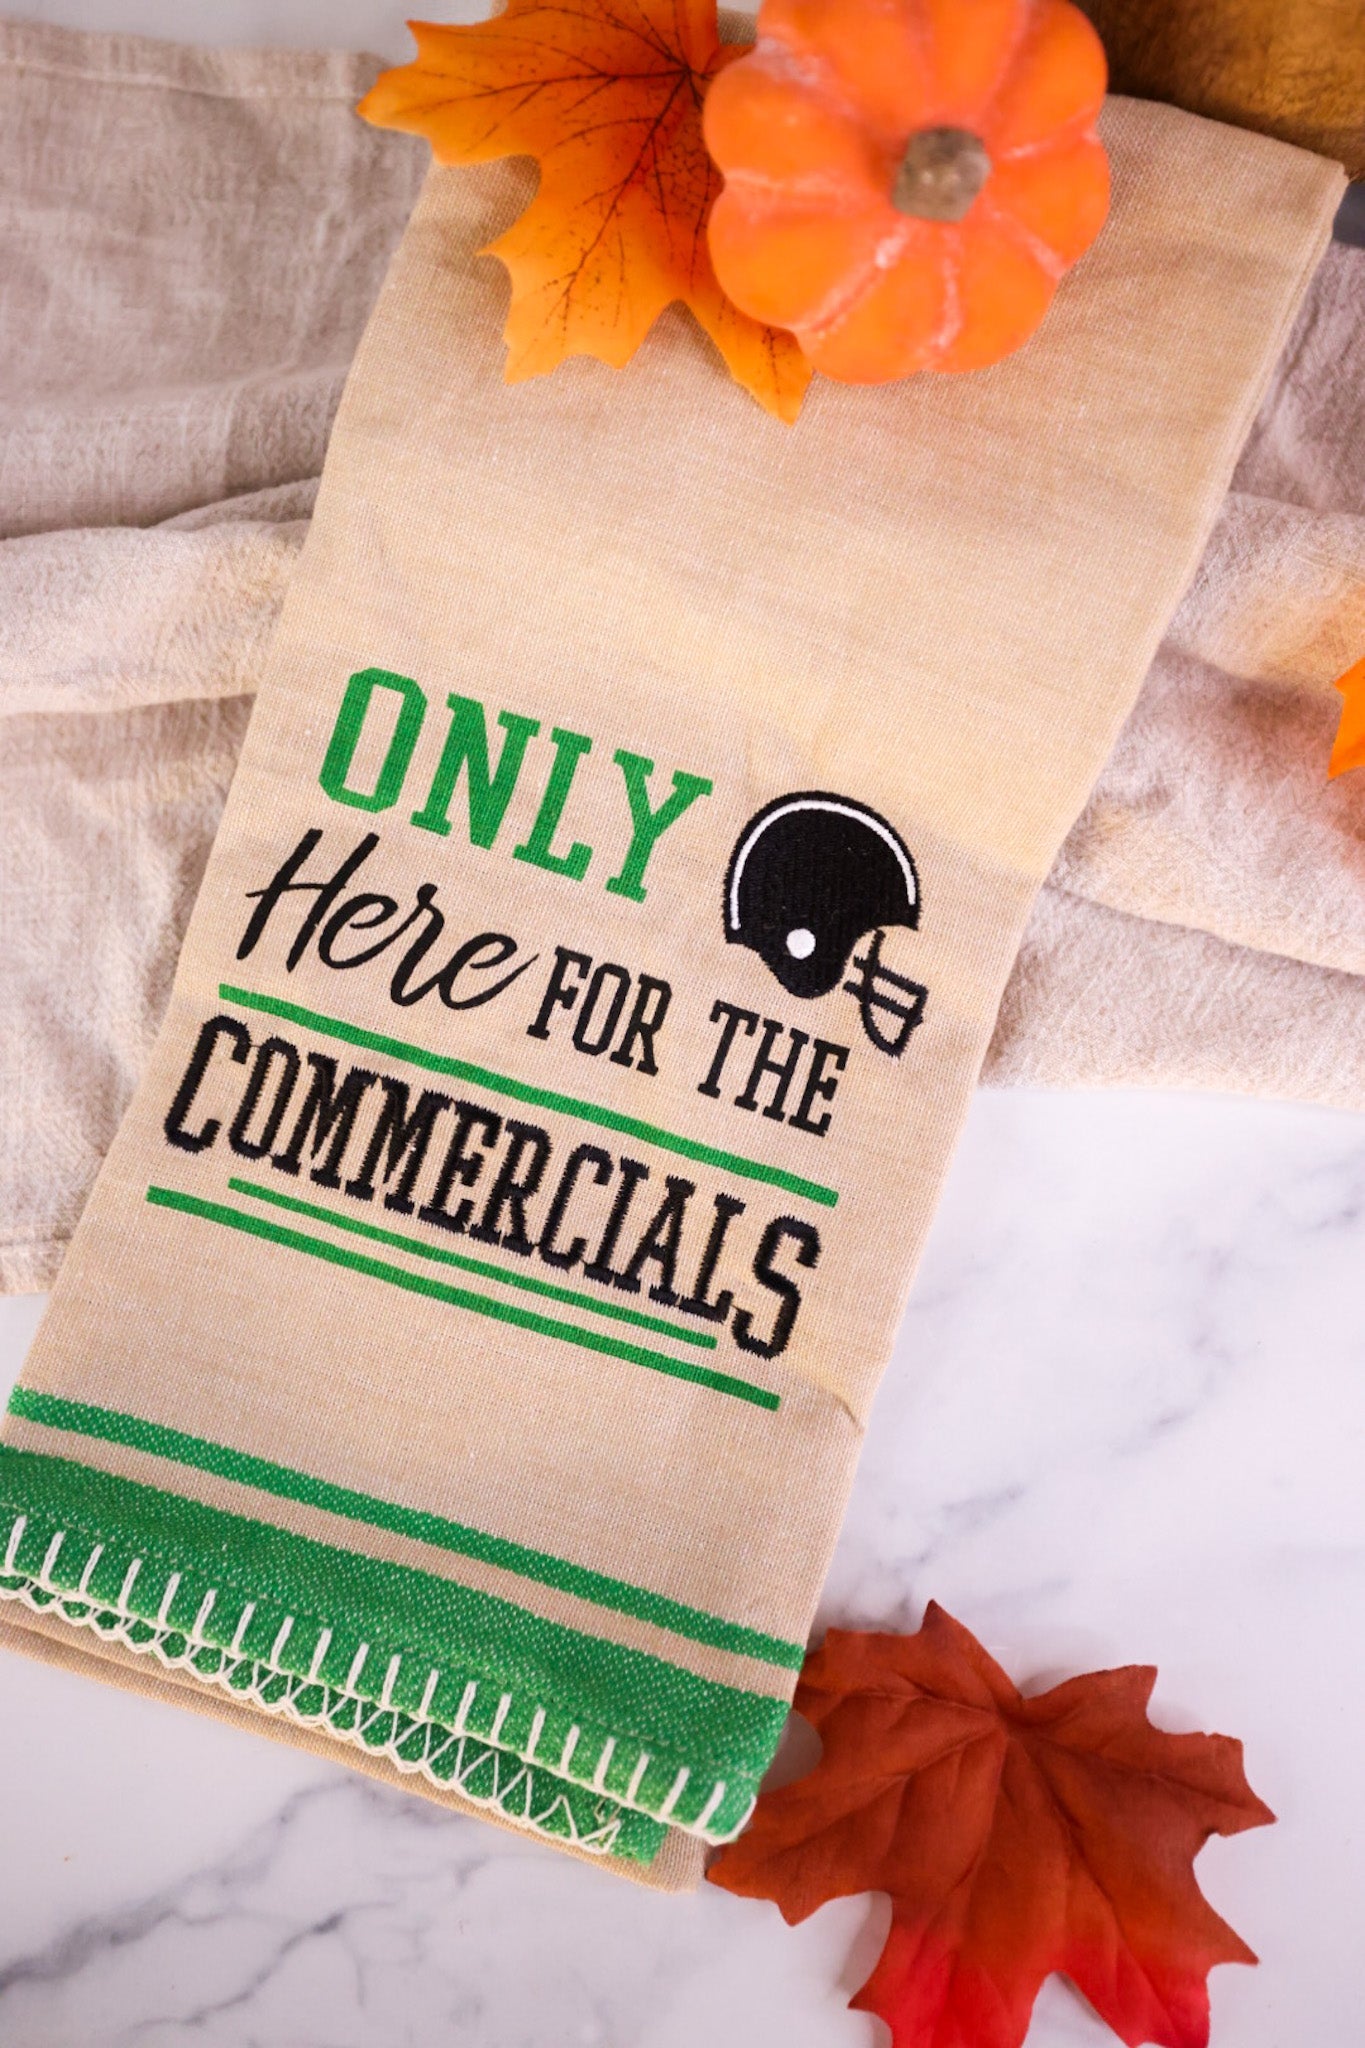 Football Commercials Kitchen Towel - Whiskey Skies